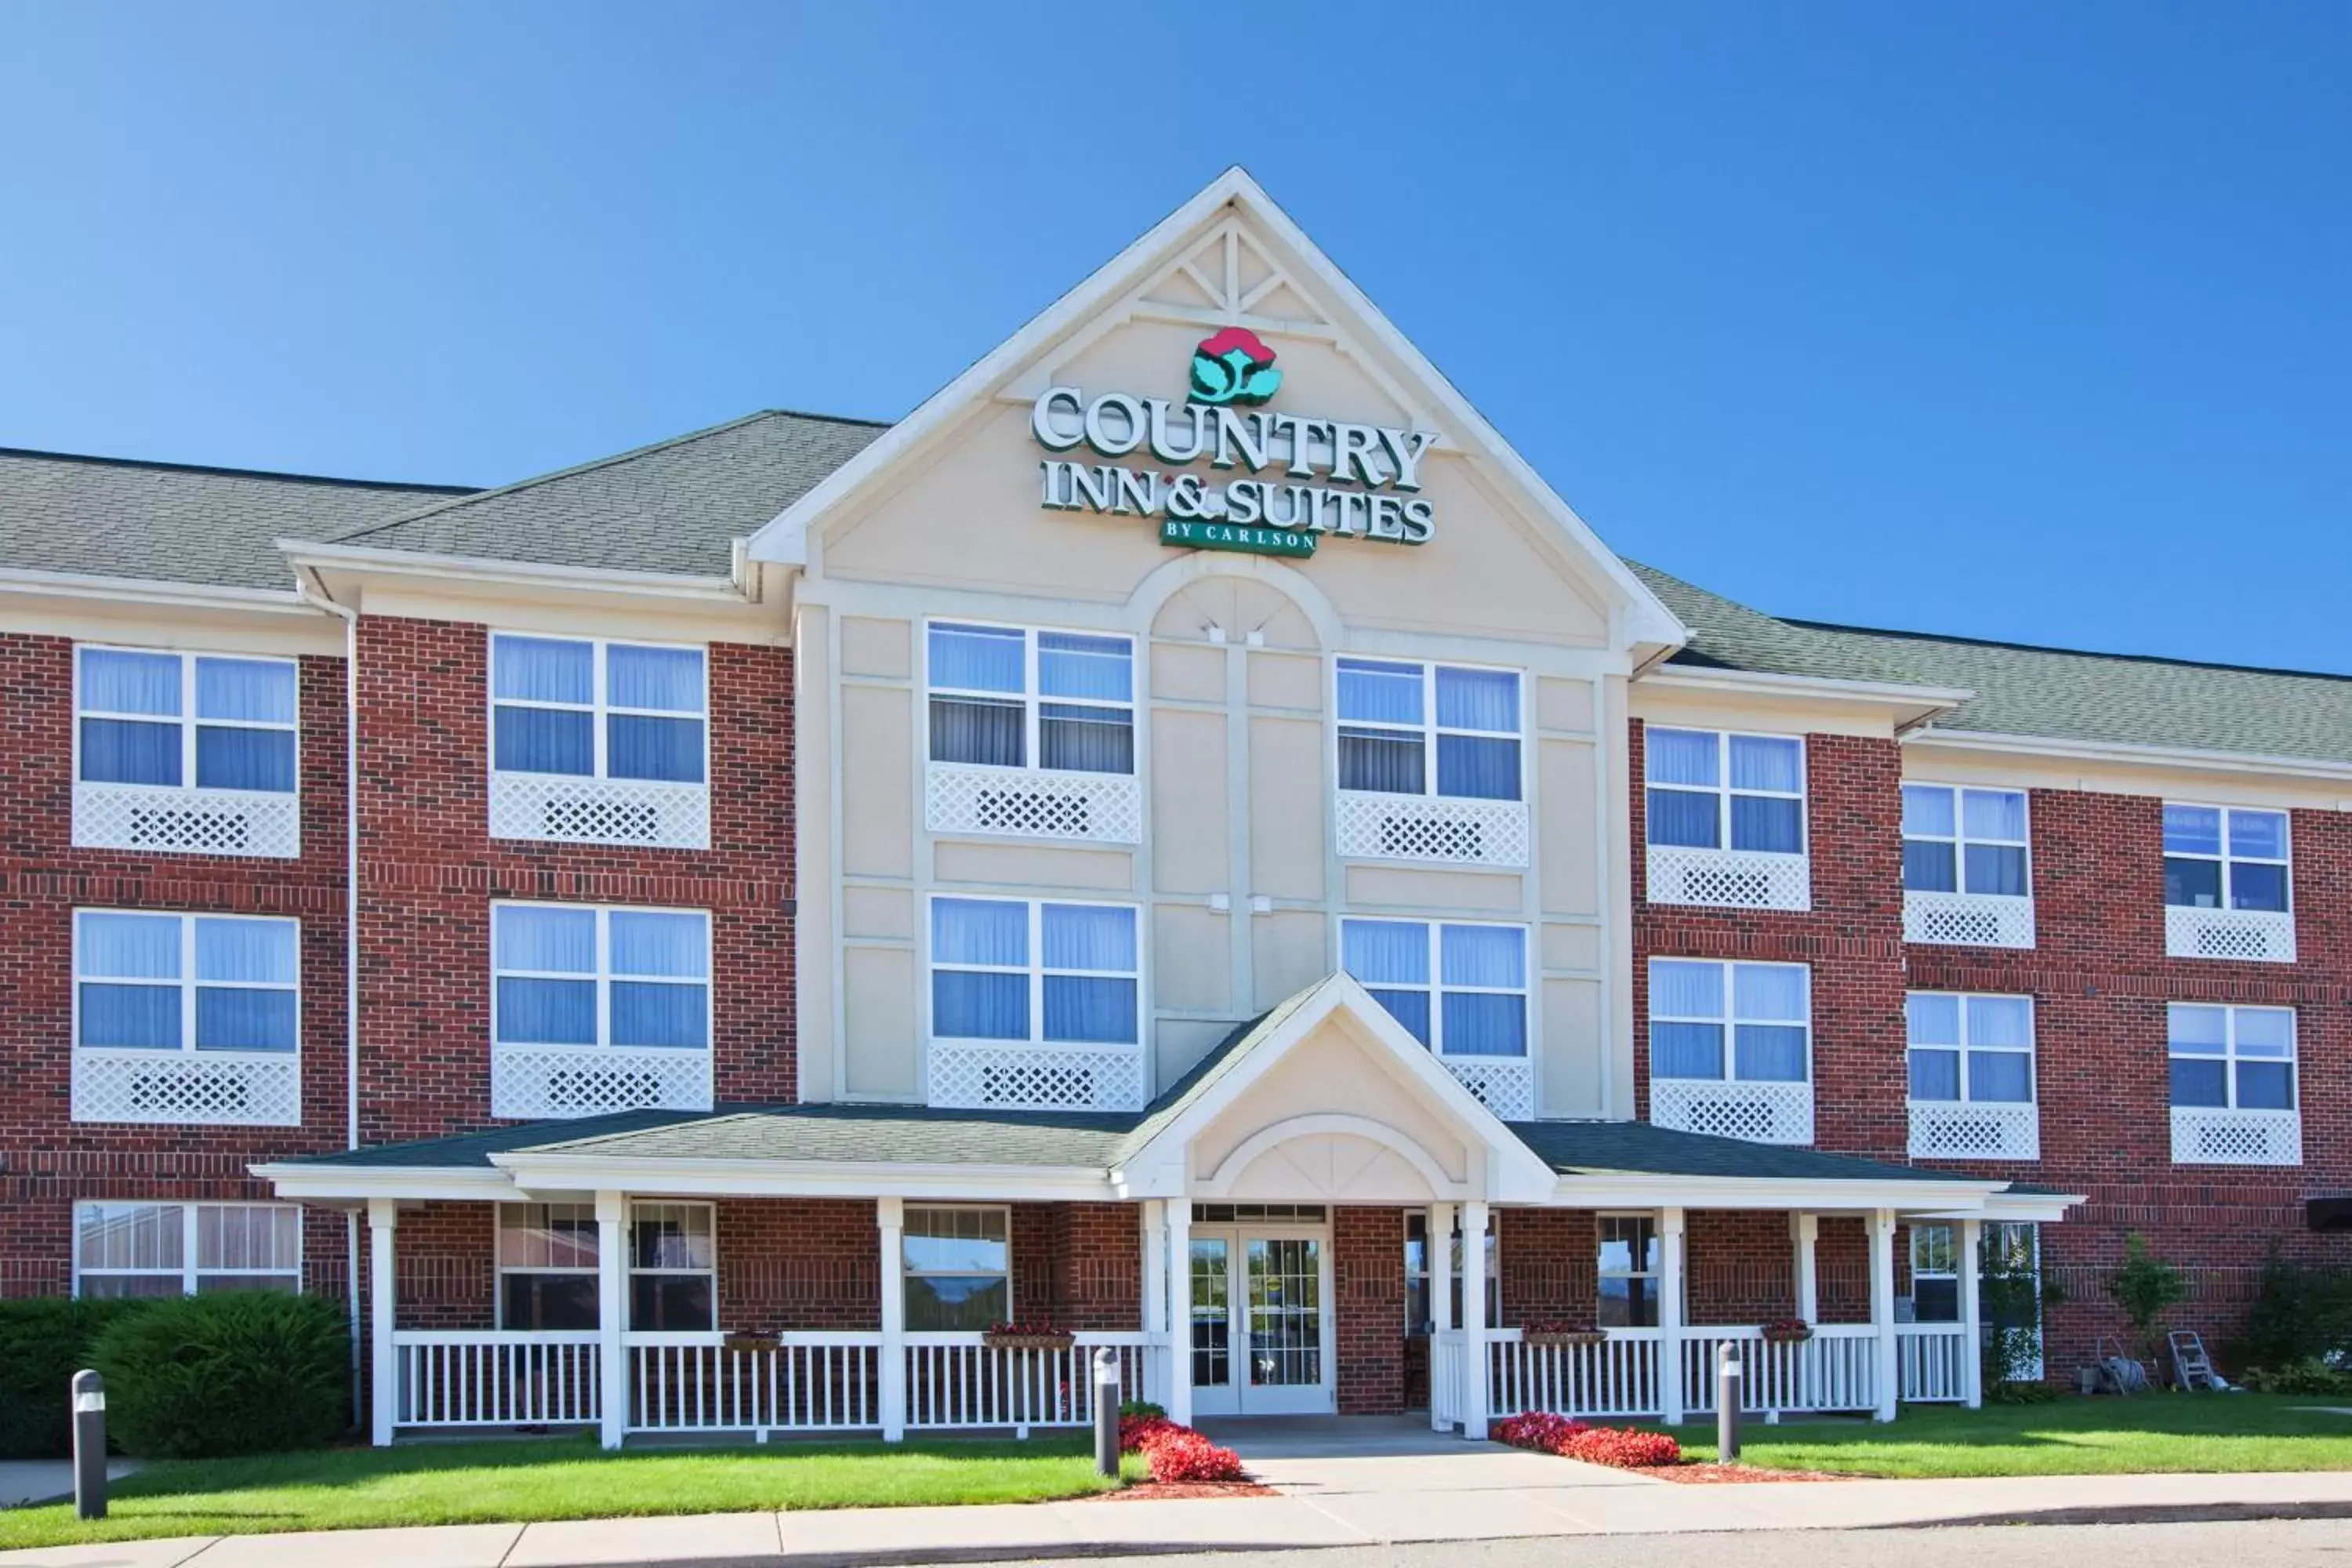 Facade/entrance, Property Building in Country Inn & Suites by Radisson, Lansing, MI